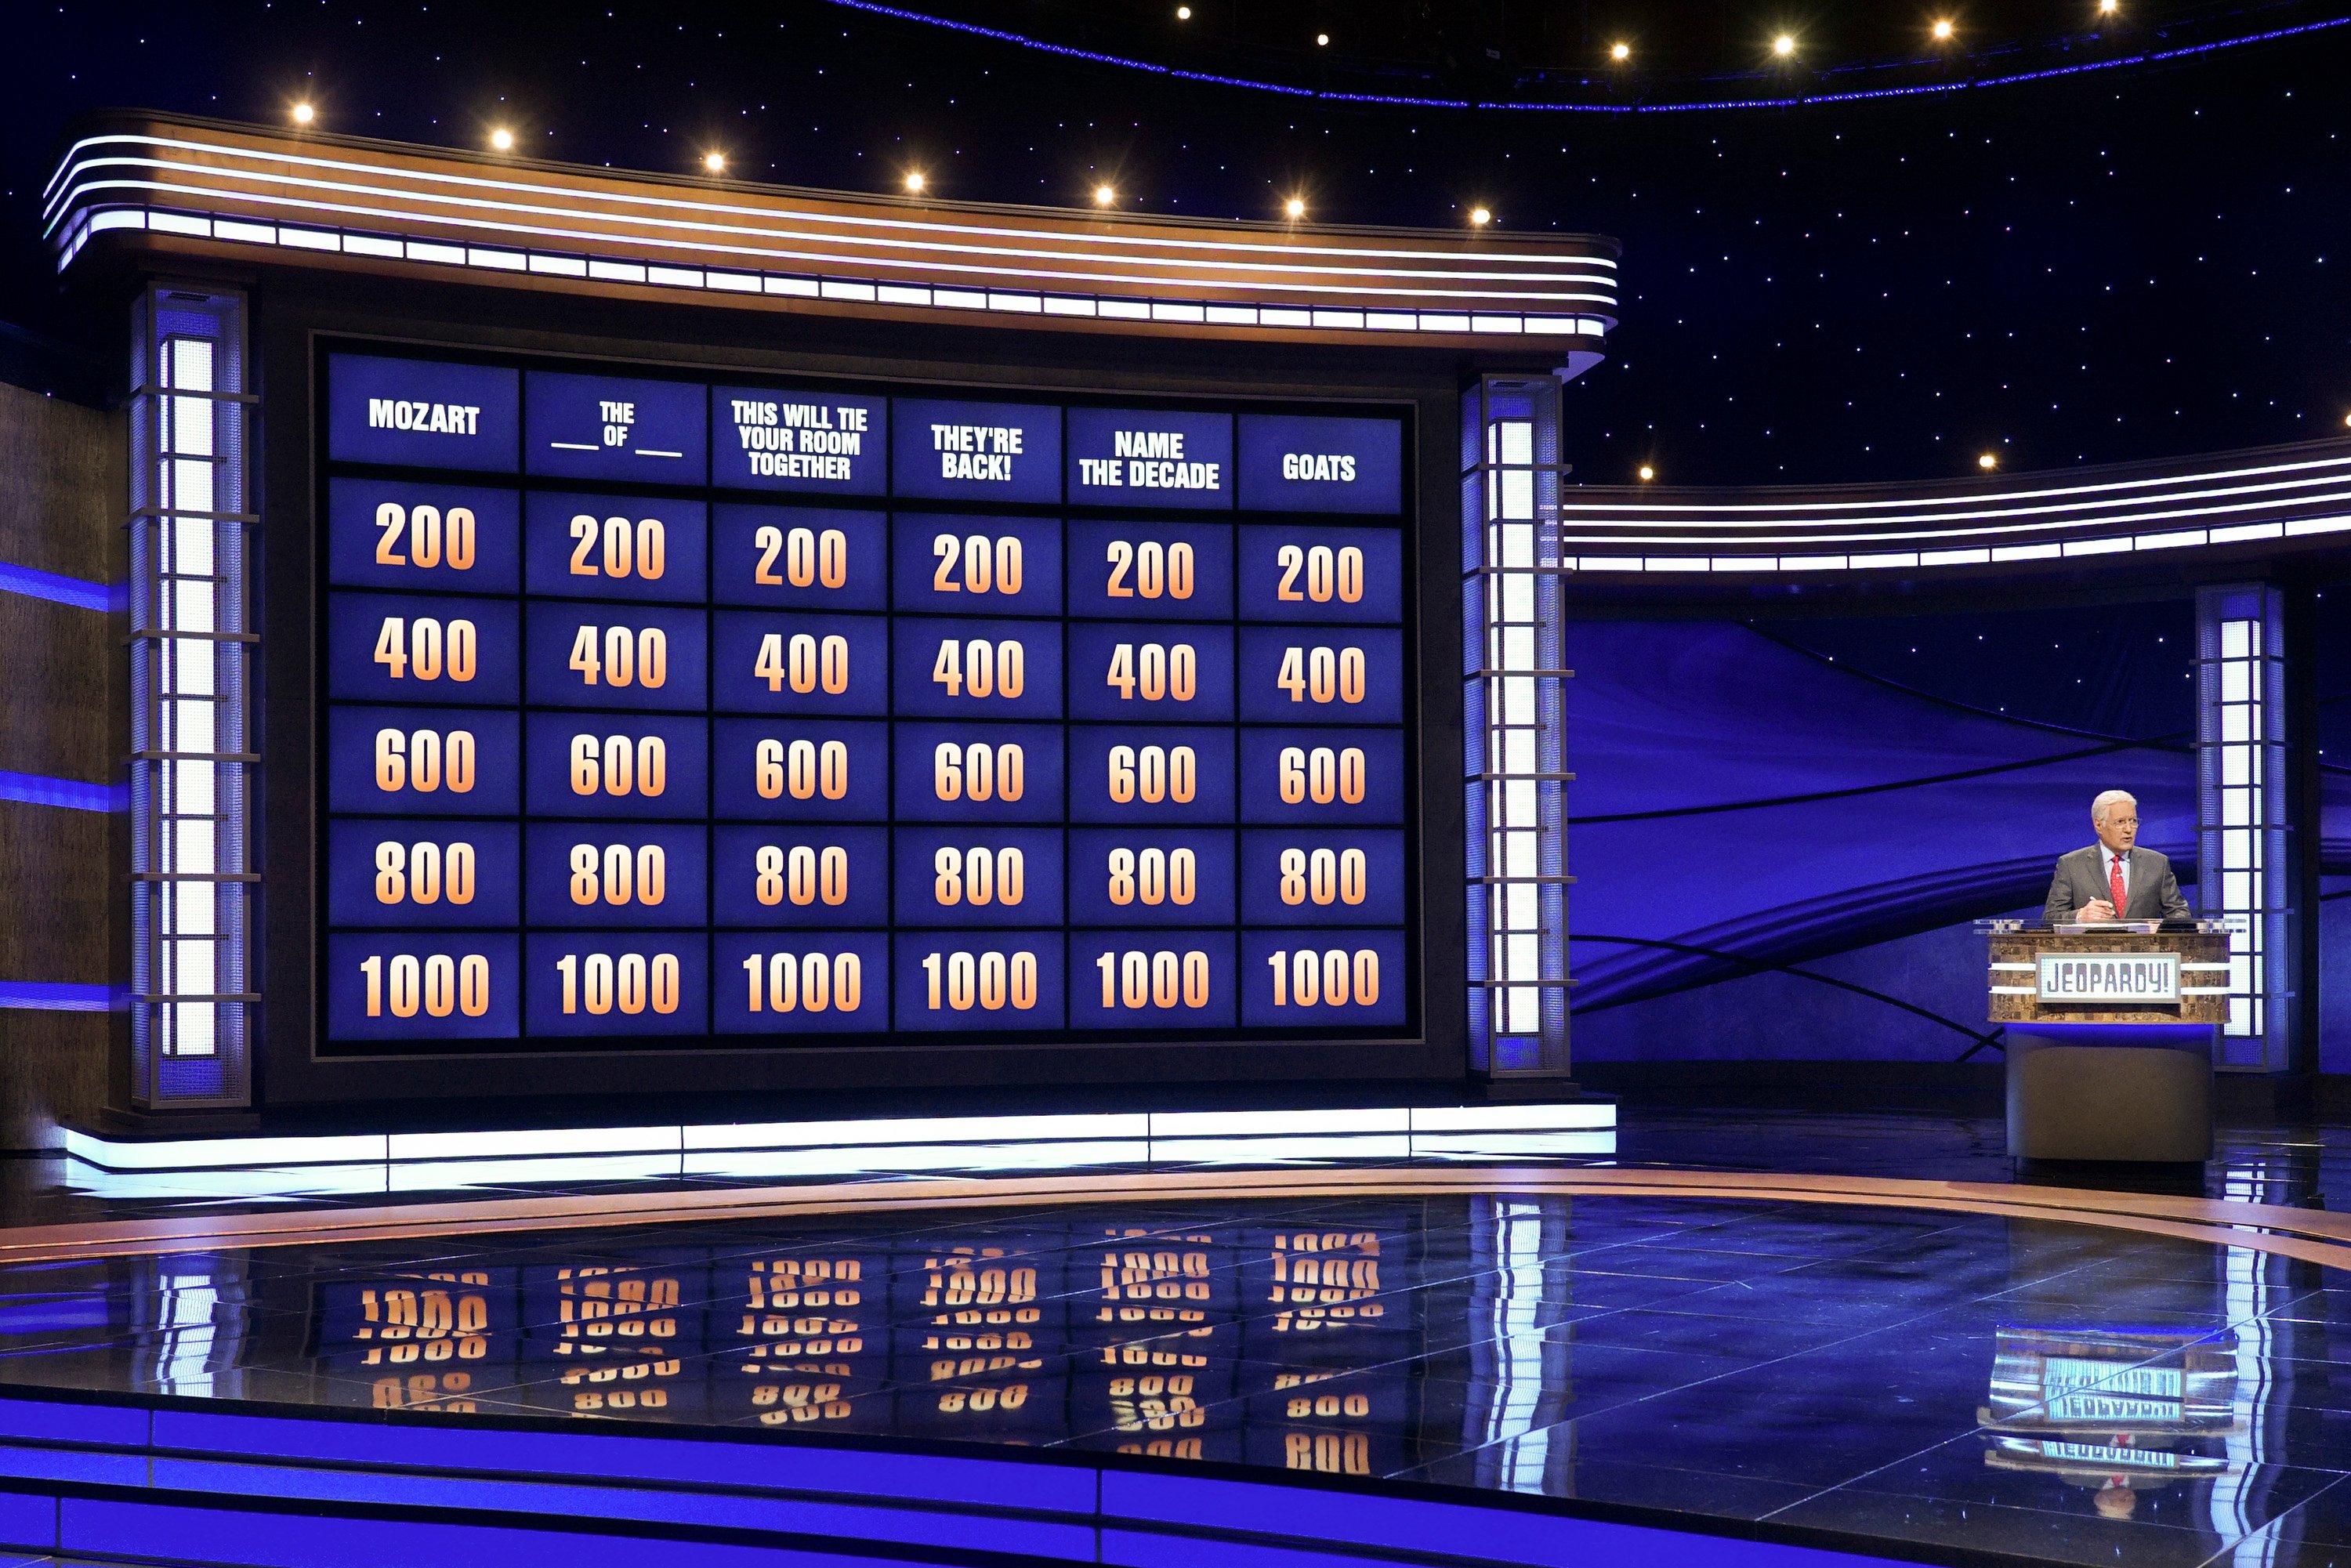 ‘Jeopardy!’ Airs ‘Handpicked’ Favorite Episodes Including Epic Matt Amodio Games